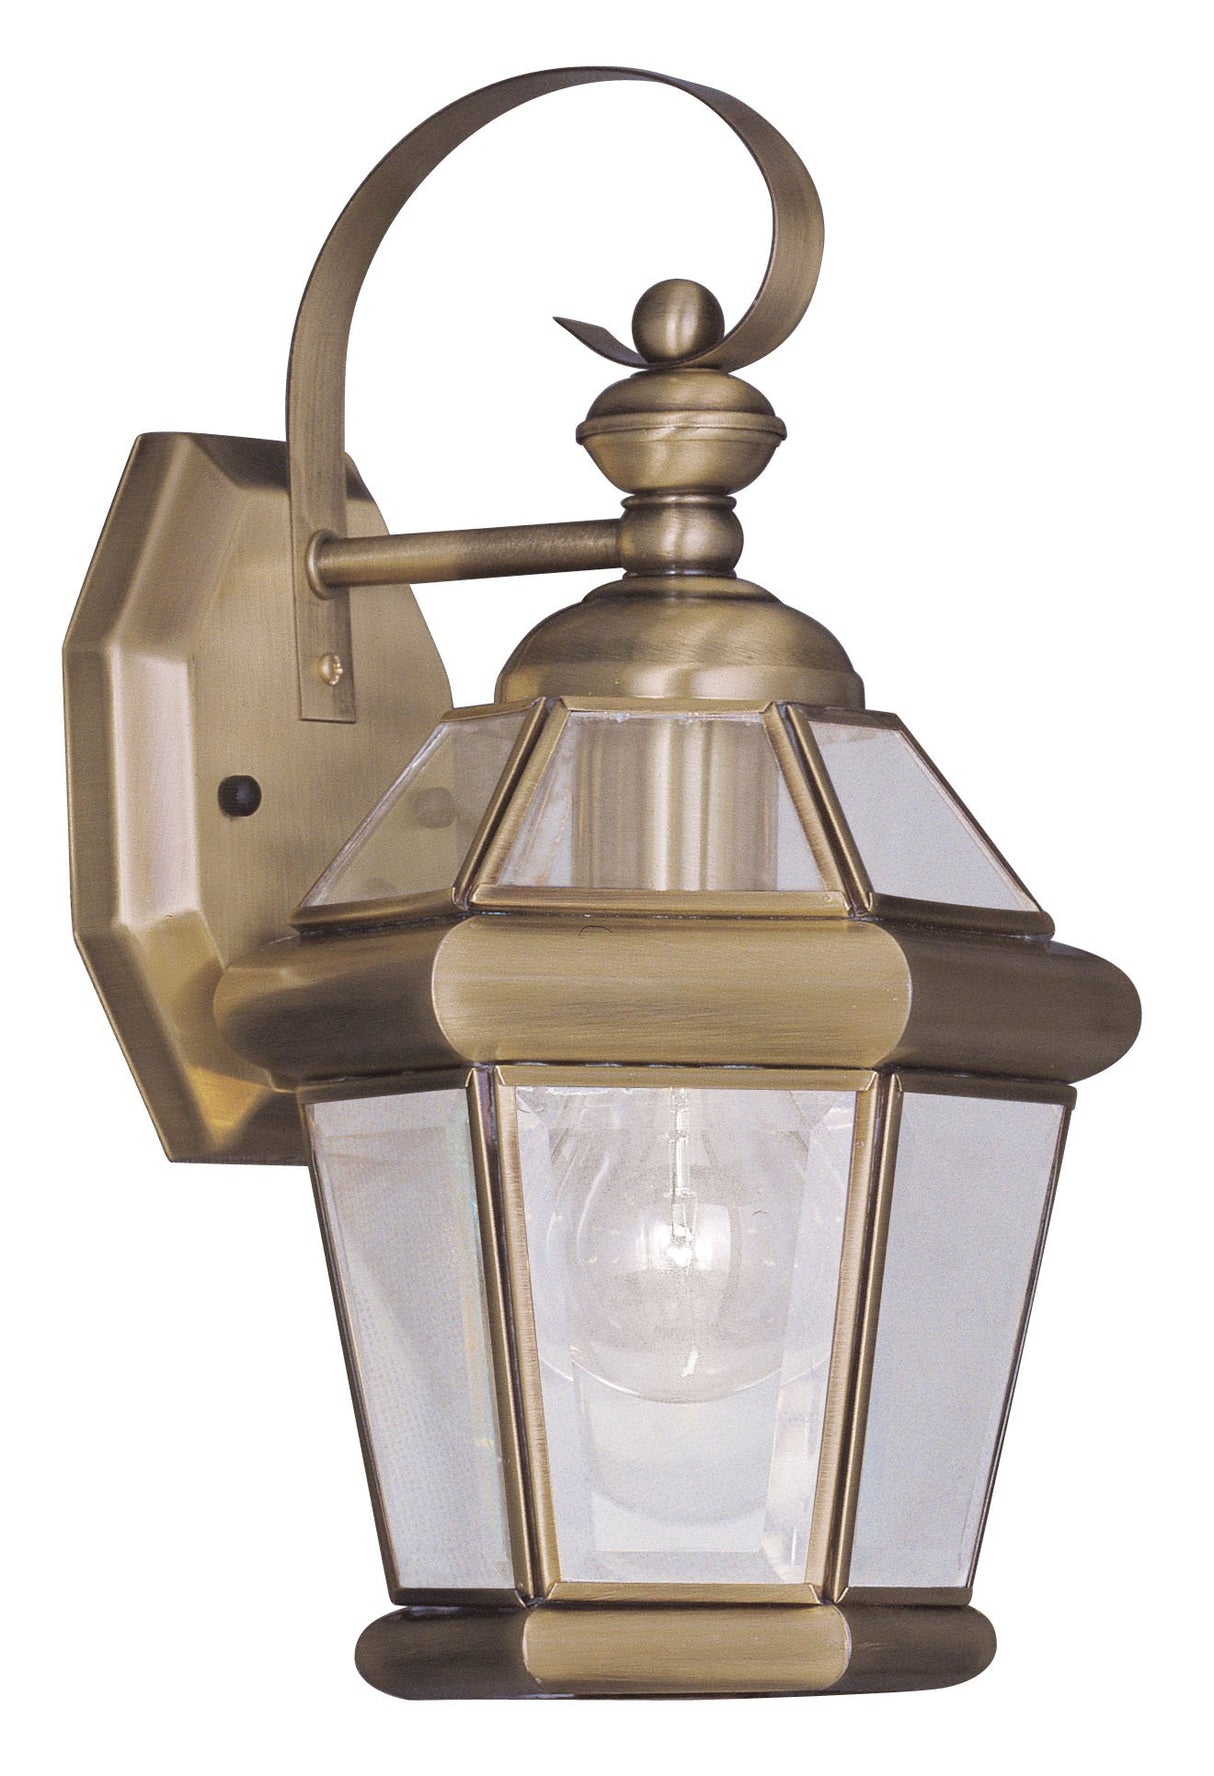 Livex Lighting 2061-01 Outdoor Wall Lantern with Clear Flat Glass Shades, Antique Brass